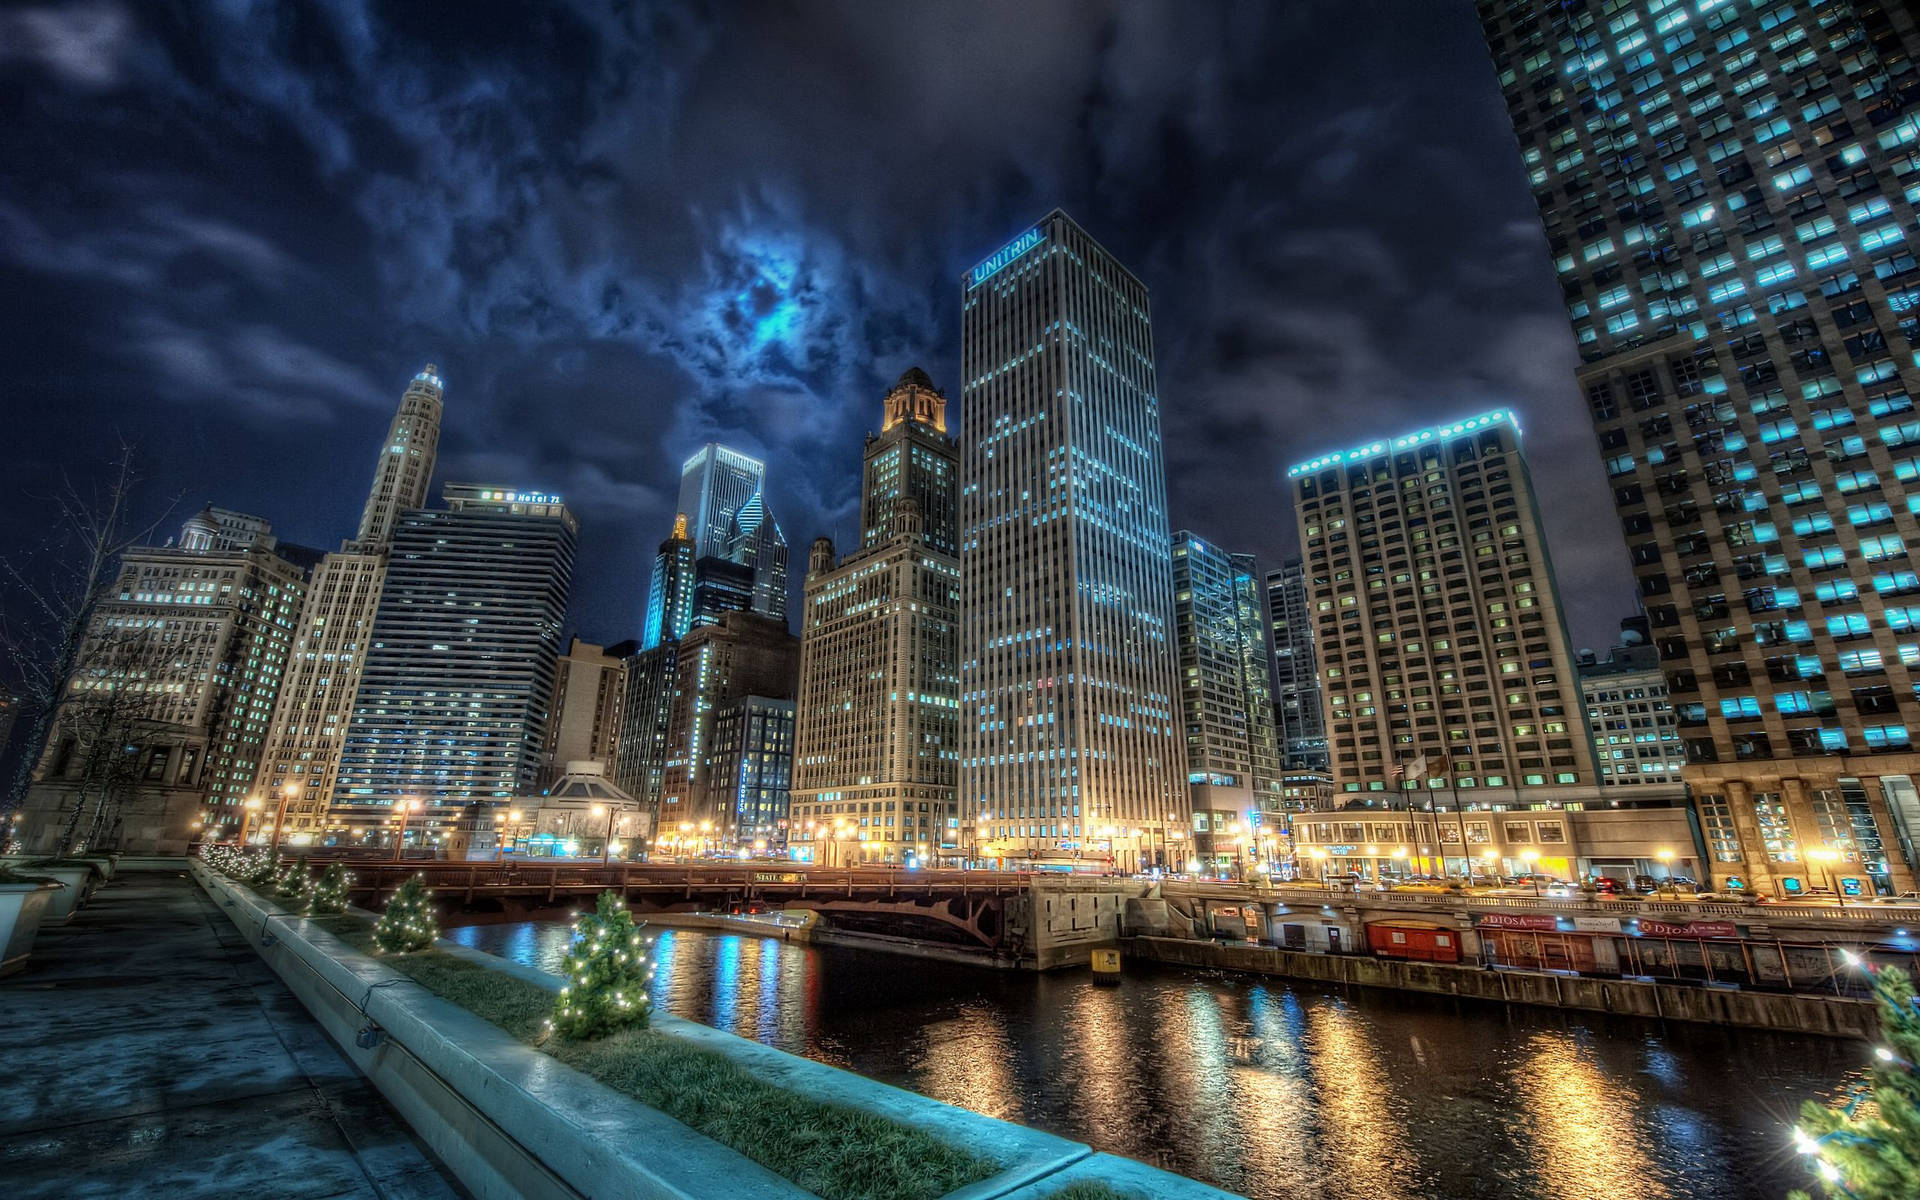 The American Night Sky Of Chicago